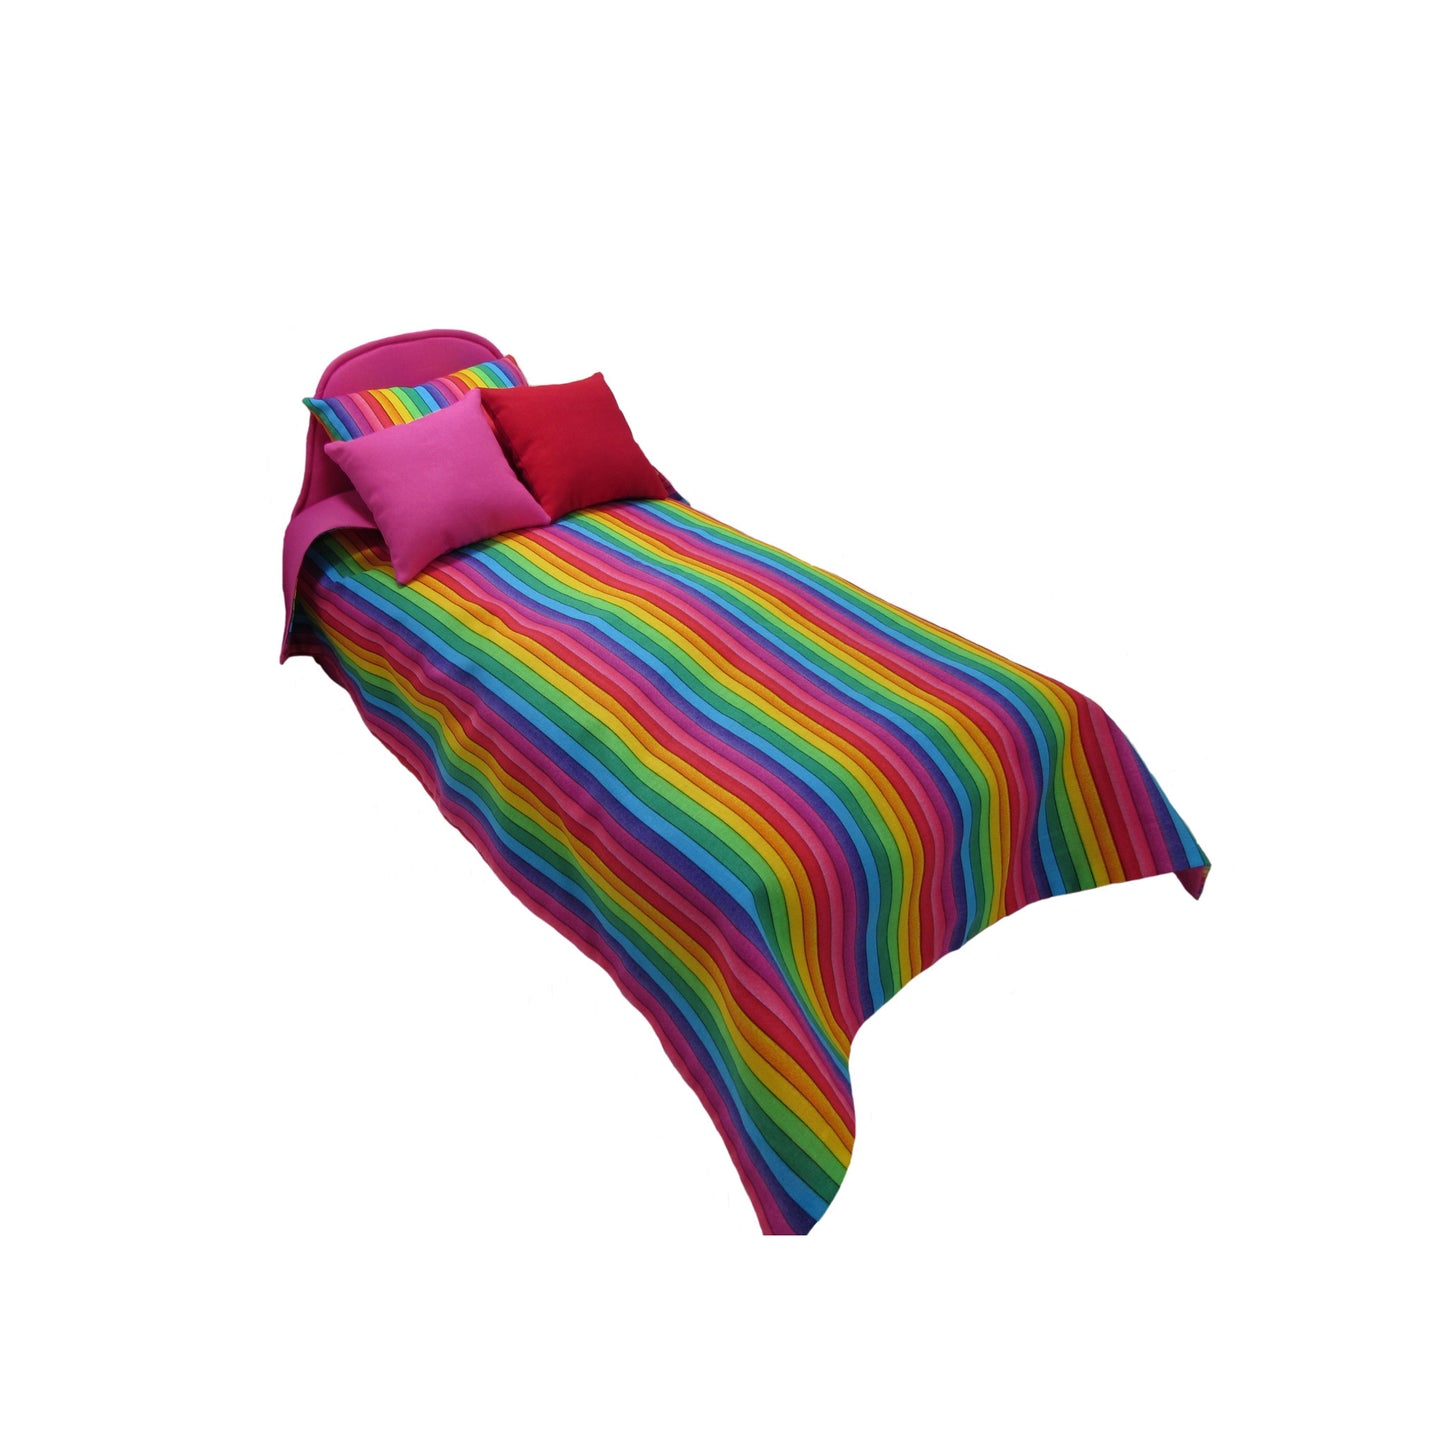 Upholstered Bright Pink Doll Bed and Rainbow Print Doll Bedding for 14.5-inch dolls